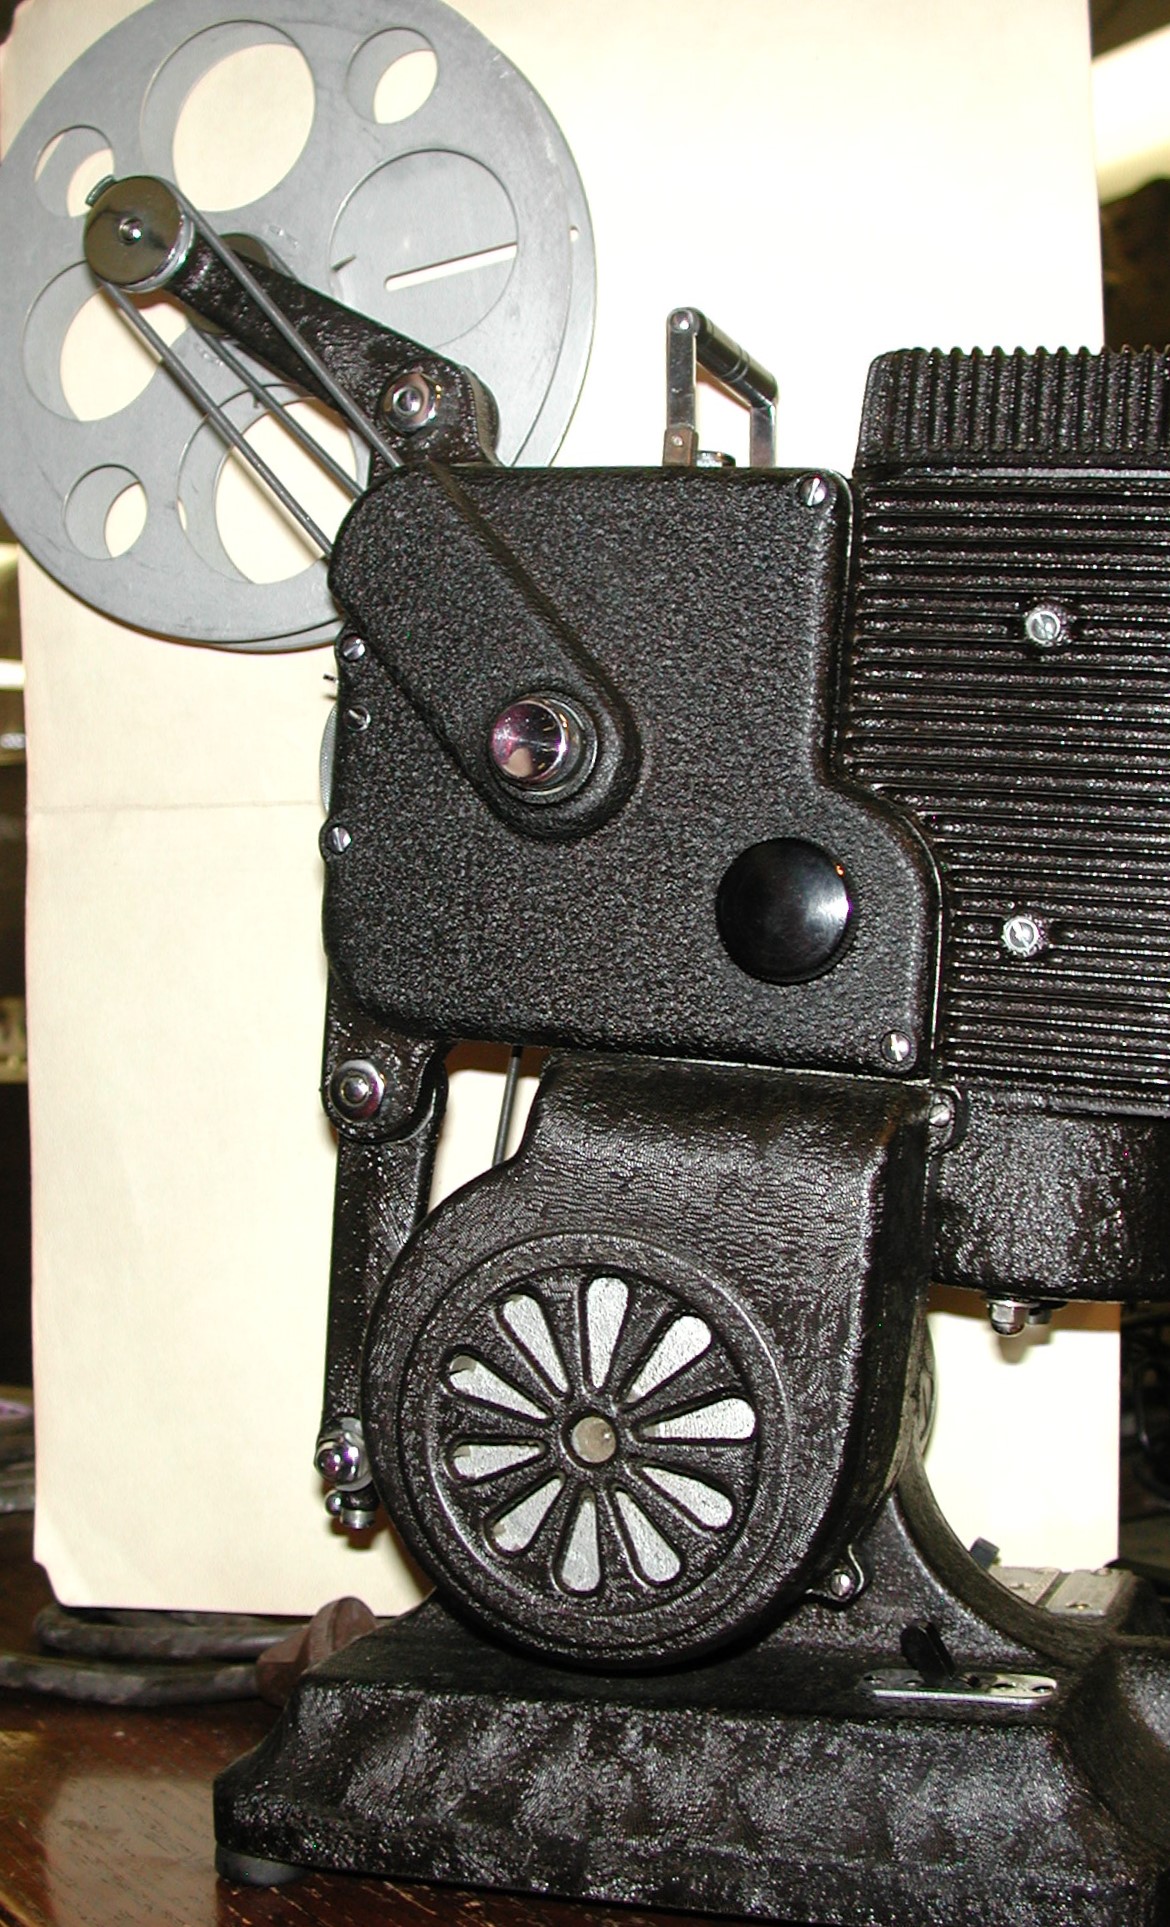 Curiosity Inc. - Rare find! Complete 1930's ampro 16mm carbon arc movie  theatre projector with power unit, carbon rods, reels and more! $3500  Canadian #movies #curiosityincyeg #antiques #theater #theatre #retro #film # projector